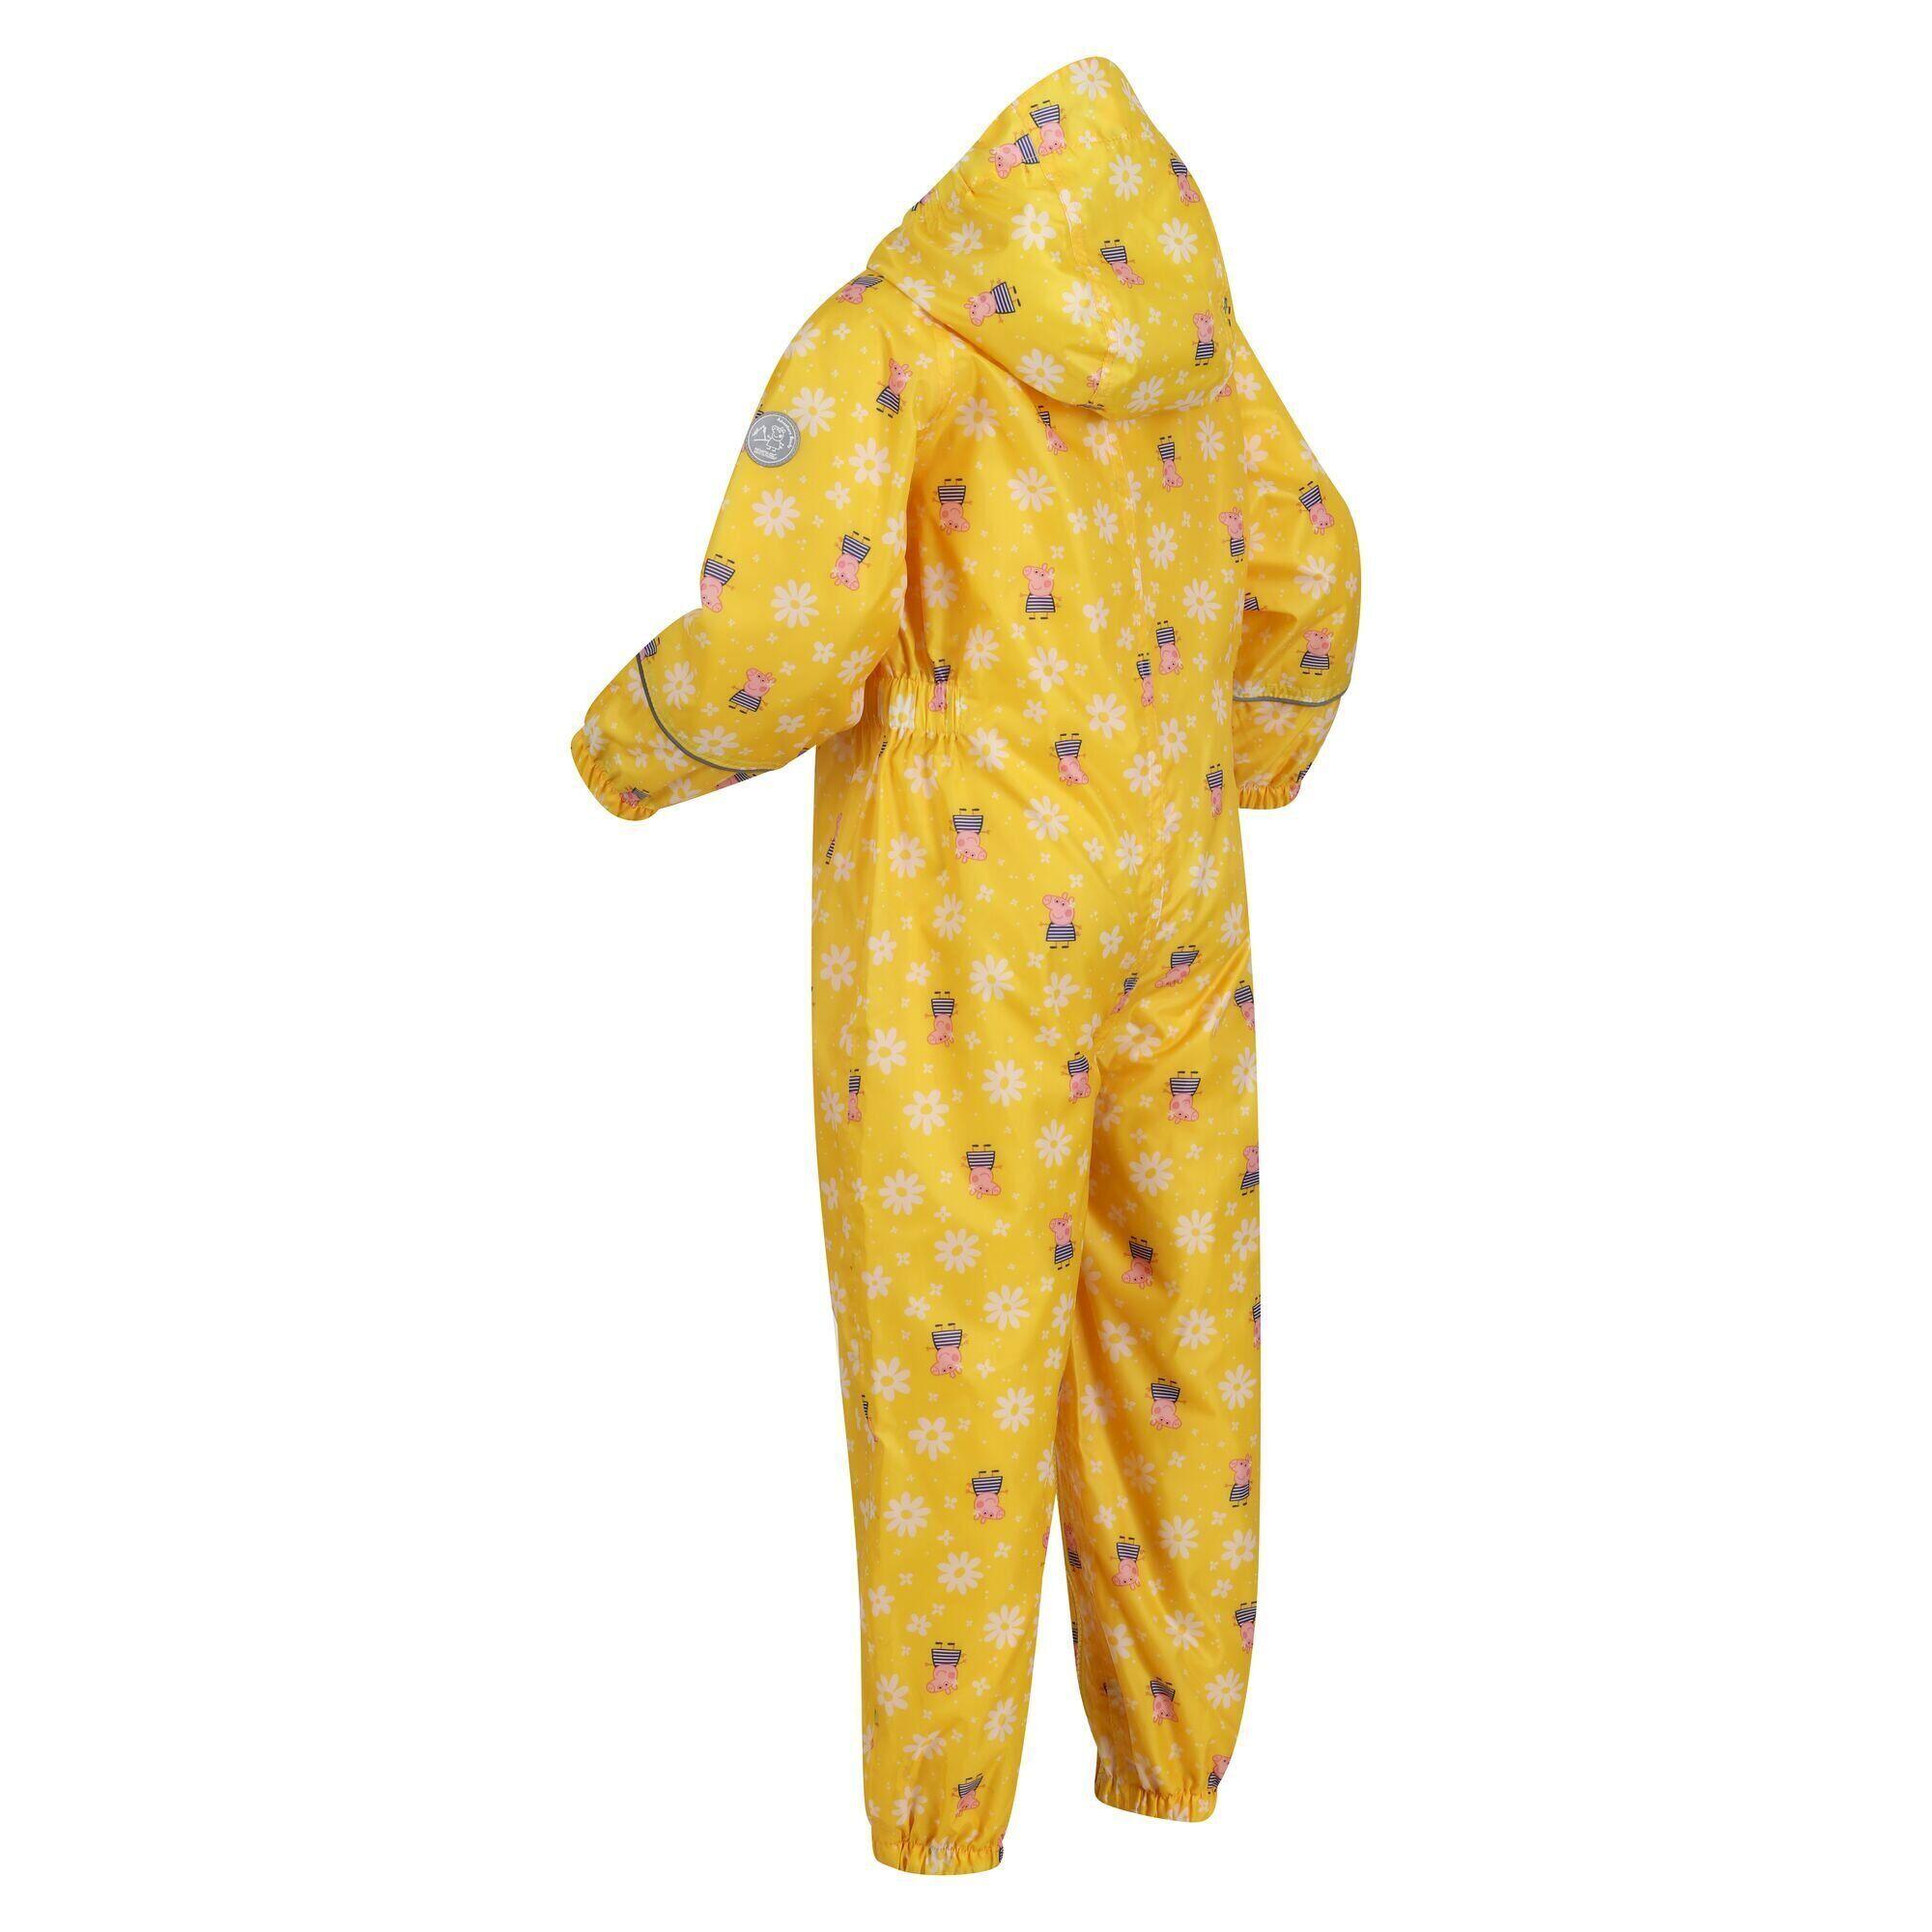 Childrens/Kids Pobble Peppa Pig Floral Waterproof Puddle Suit (Maize Yellow) 3/5